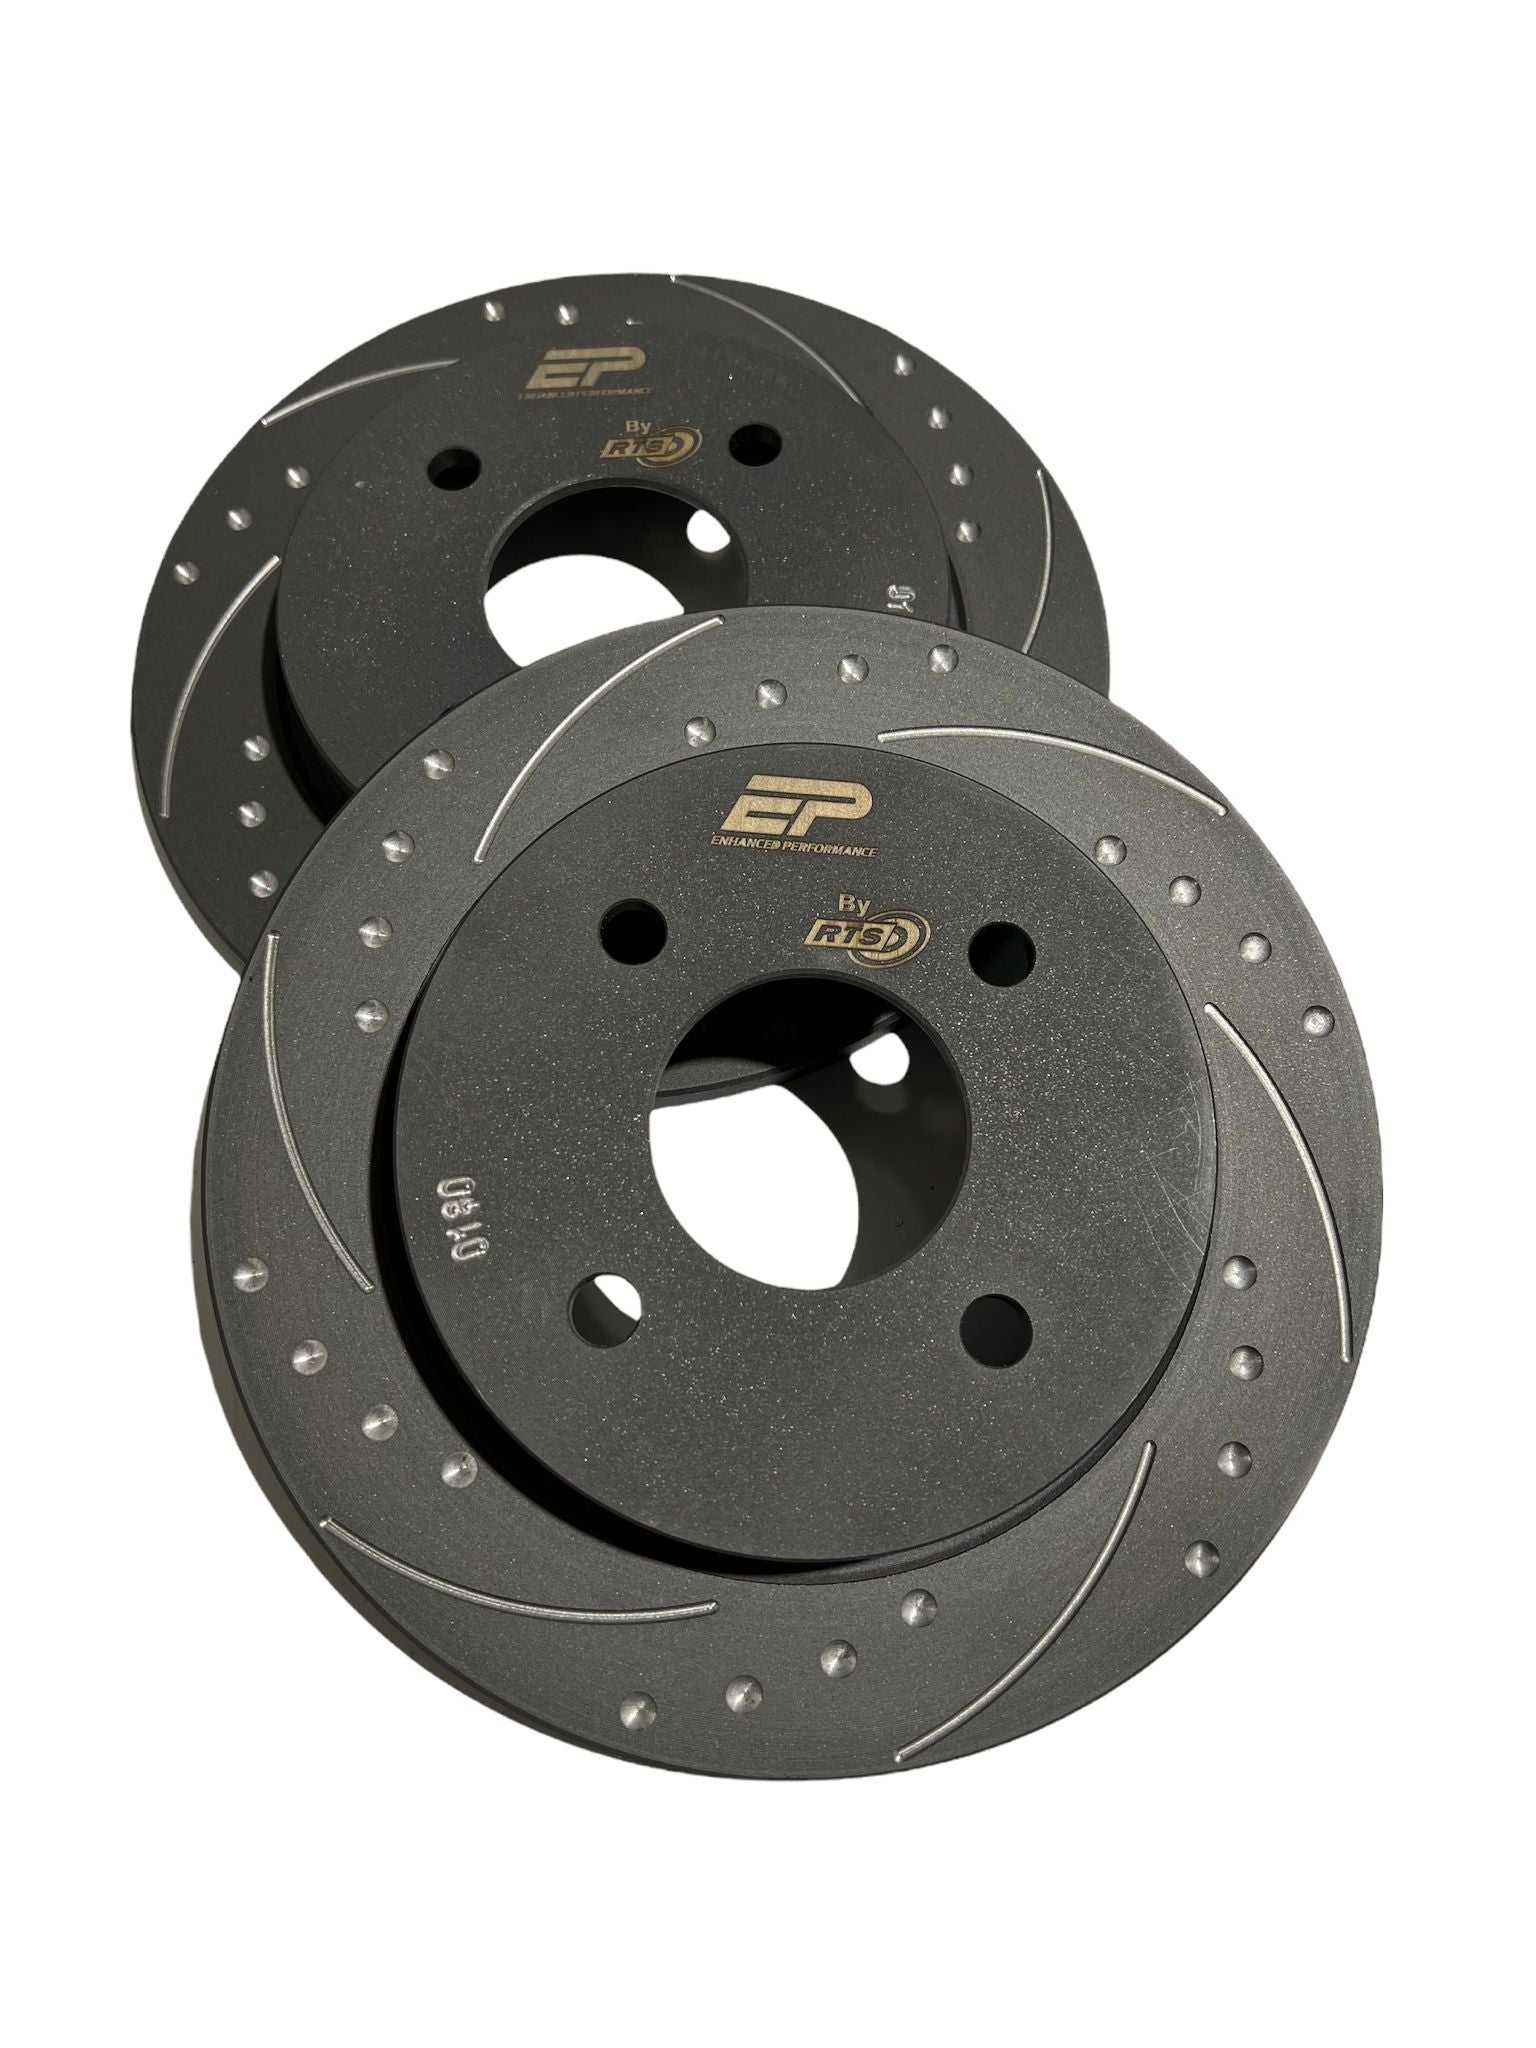 Enhanced Performance, Enhanced Performance (By RTS) Rear Brake Disc Upgrade - MK8 Fiesta 1.0 - Dimpled & Grooved